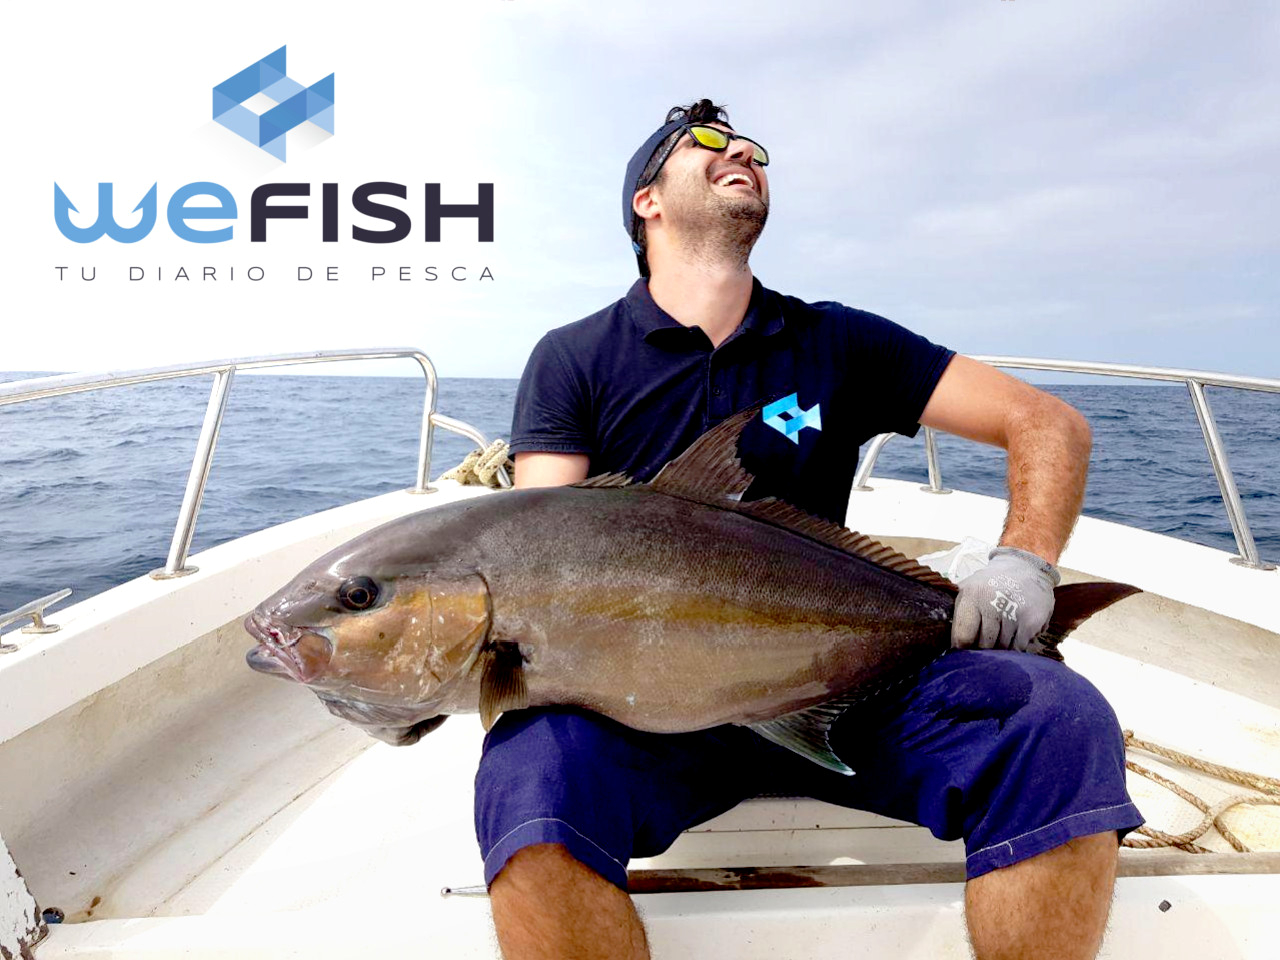 Have you ever heard of WeFish?